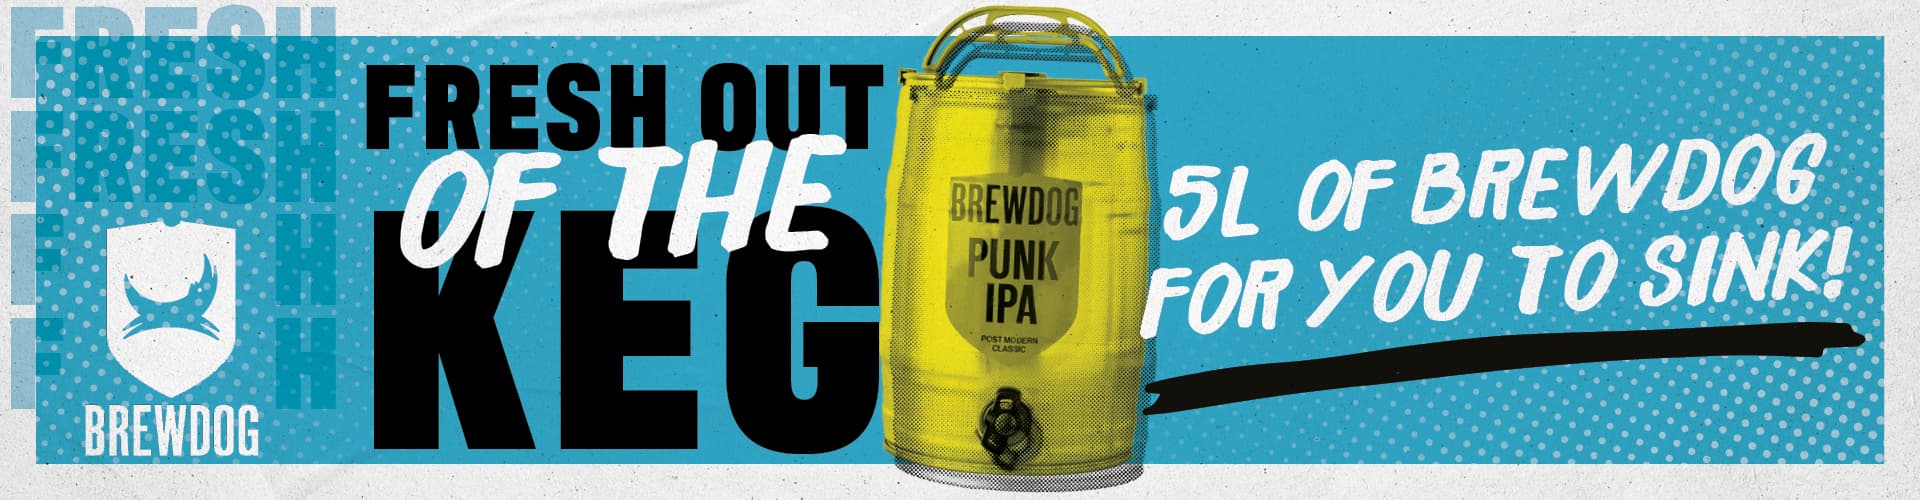 Fresh out of the keg - 5 litres of BrewDog for you to sink!